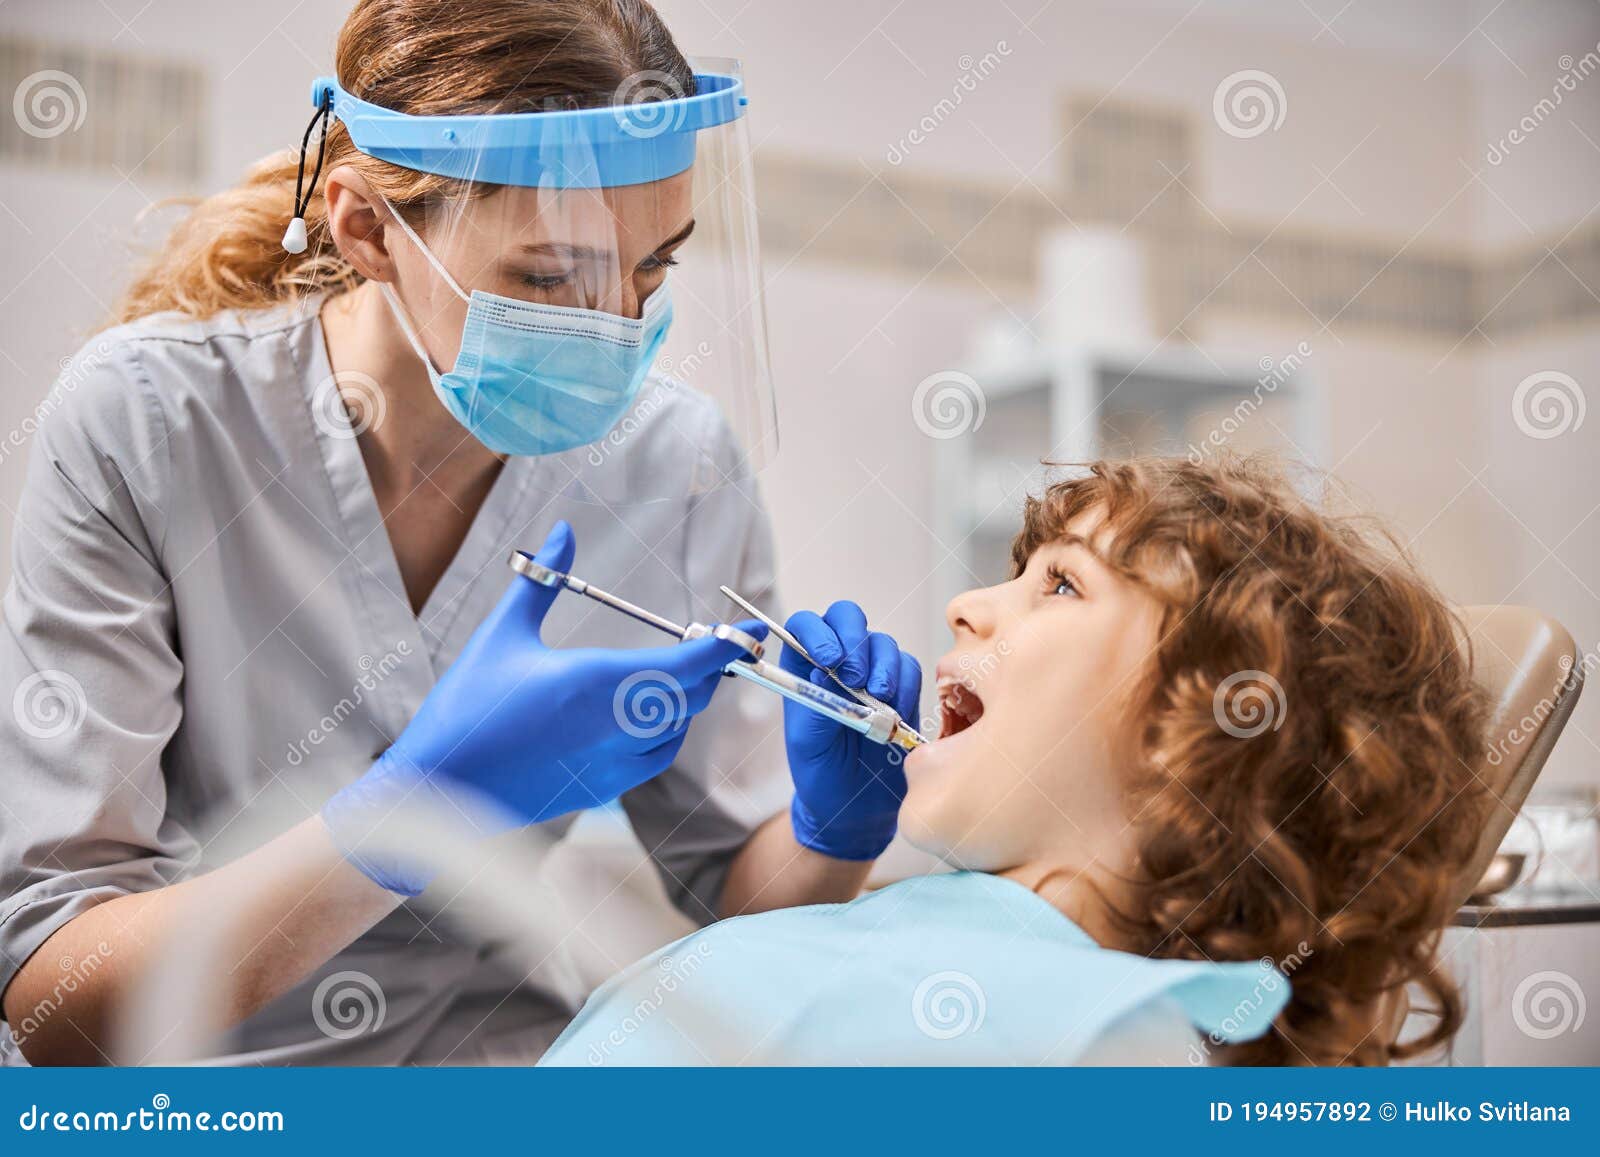 professional dentist is giving anesthesia to a child